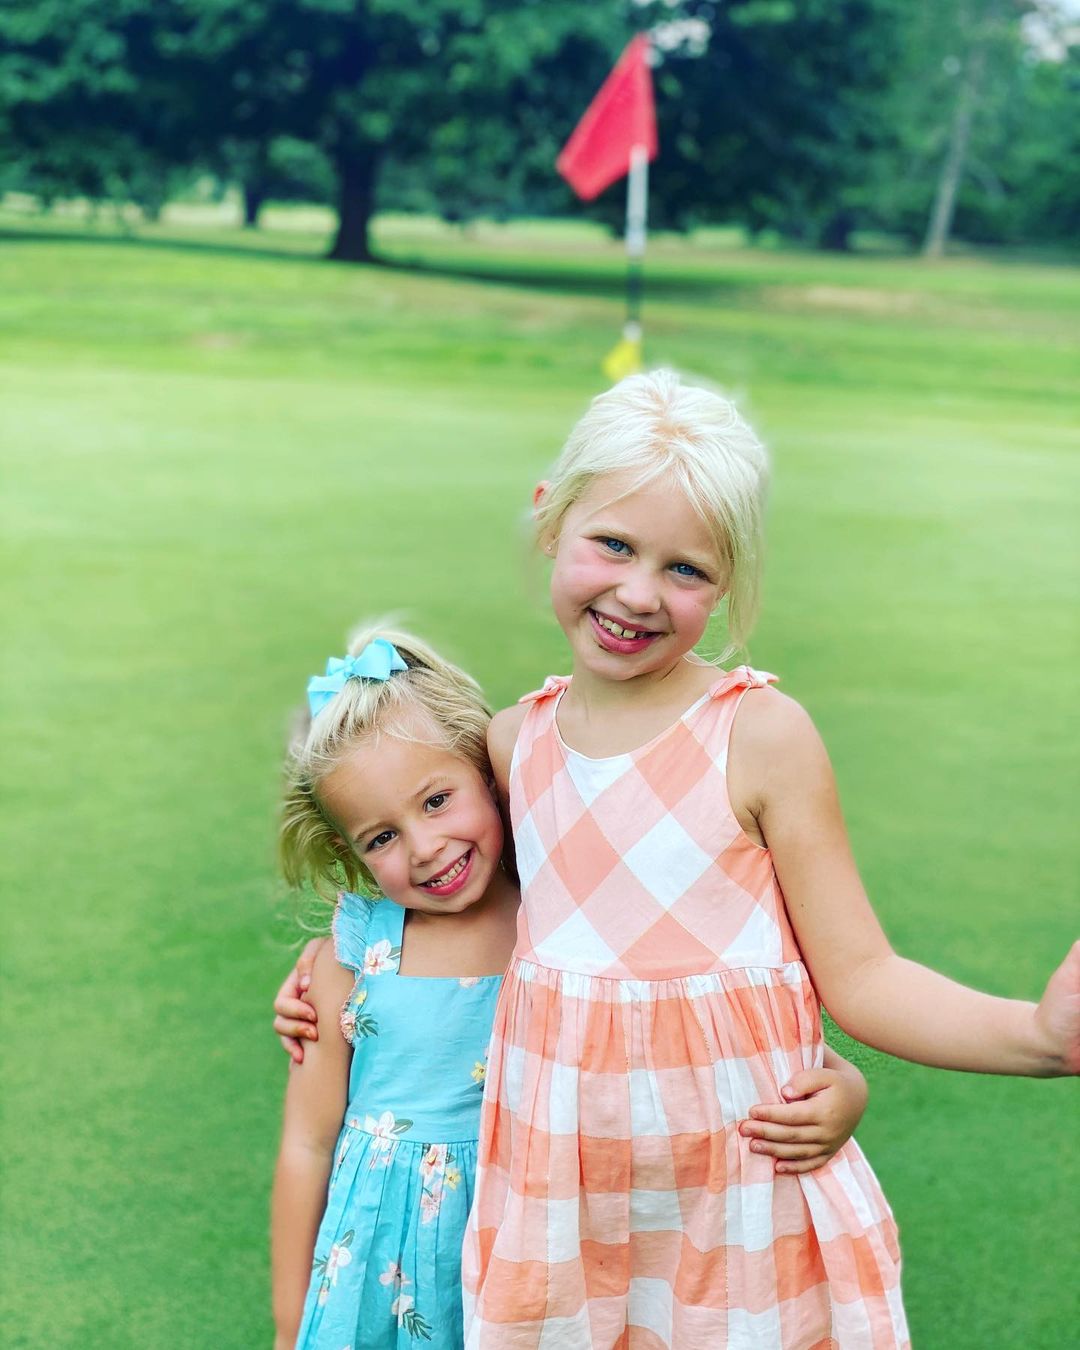 Finley with her golfing buddy and sister Blake Briscoe in 2020